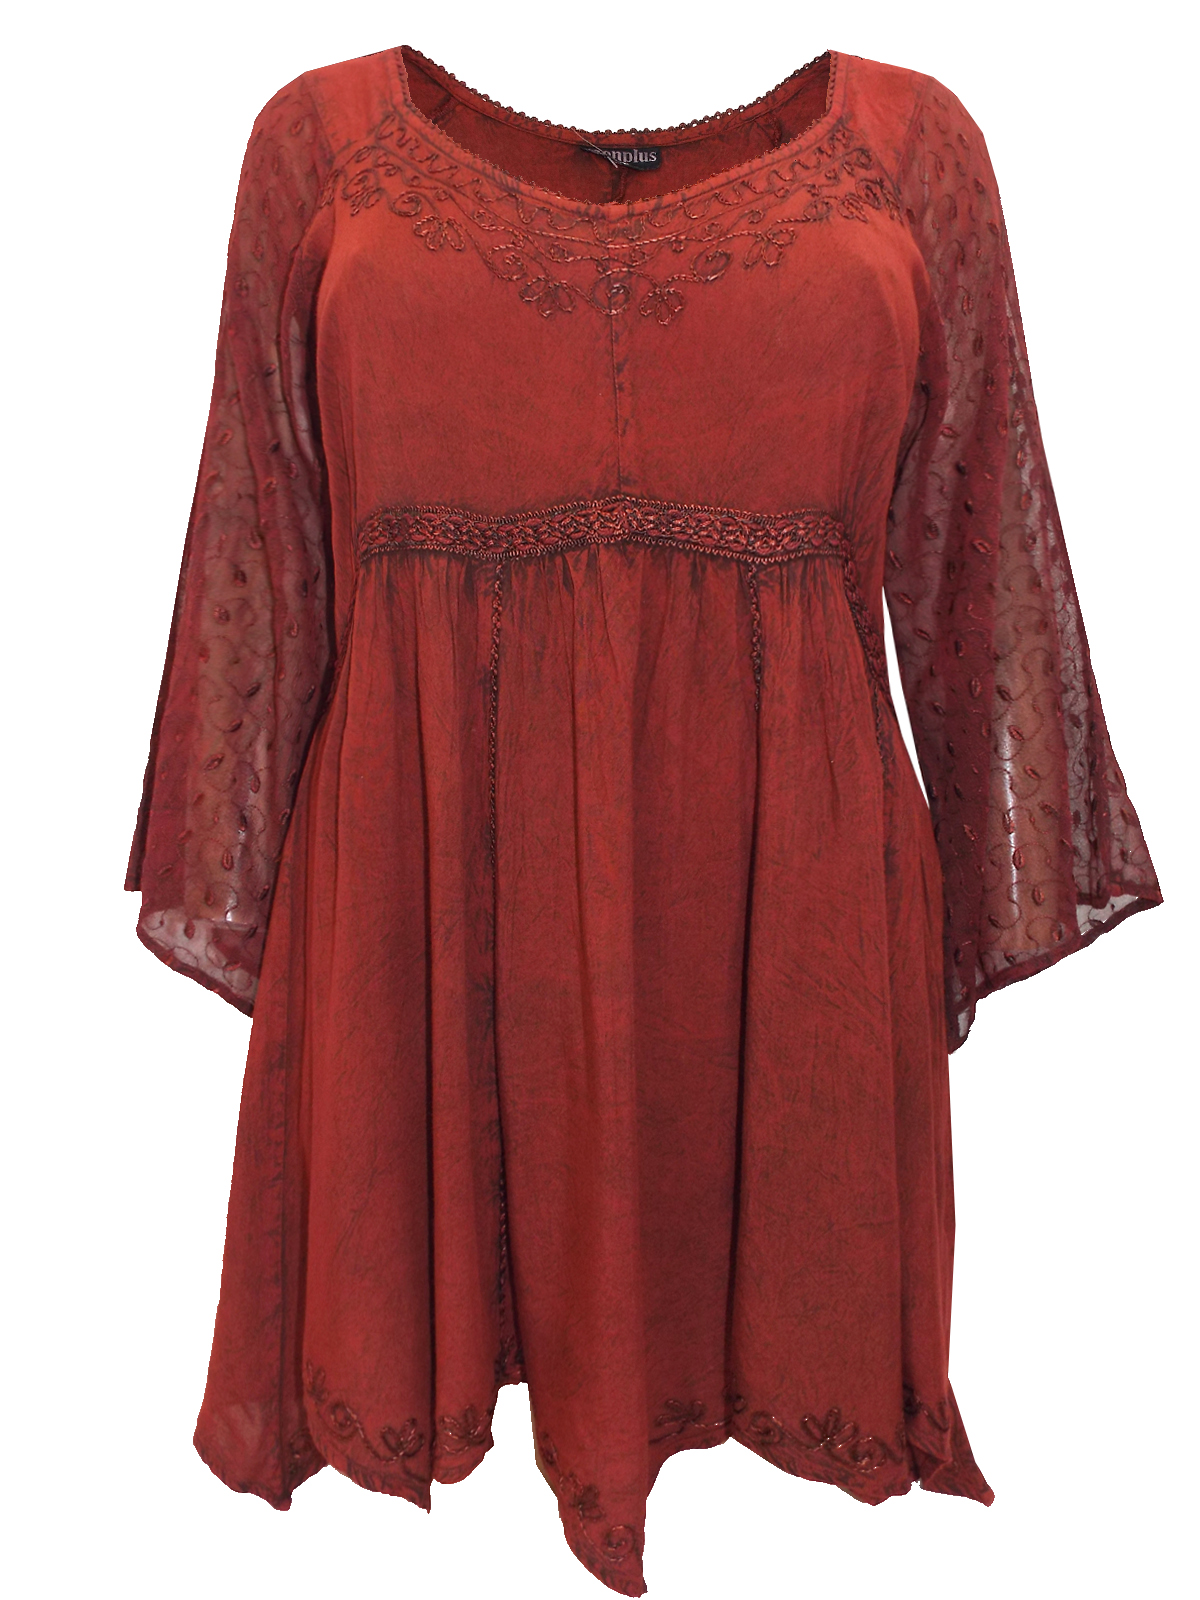 Eaonplus DARK RED Empire Renaissance Embroidered Tunic - Plus Size 18 to 32